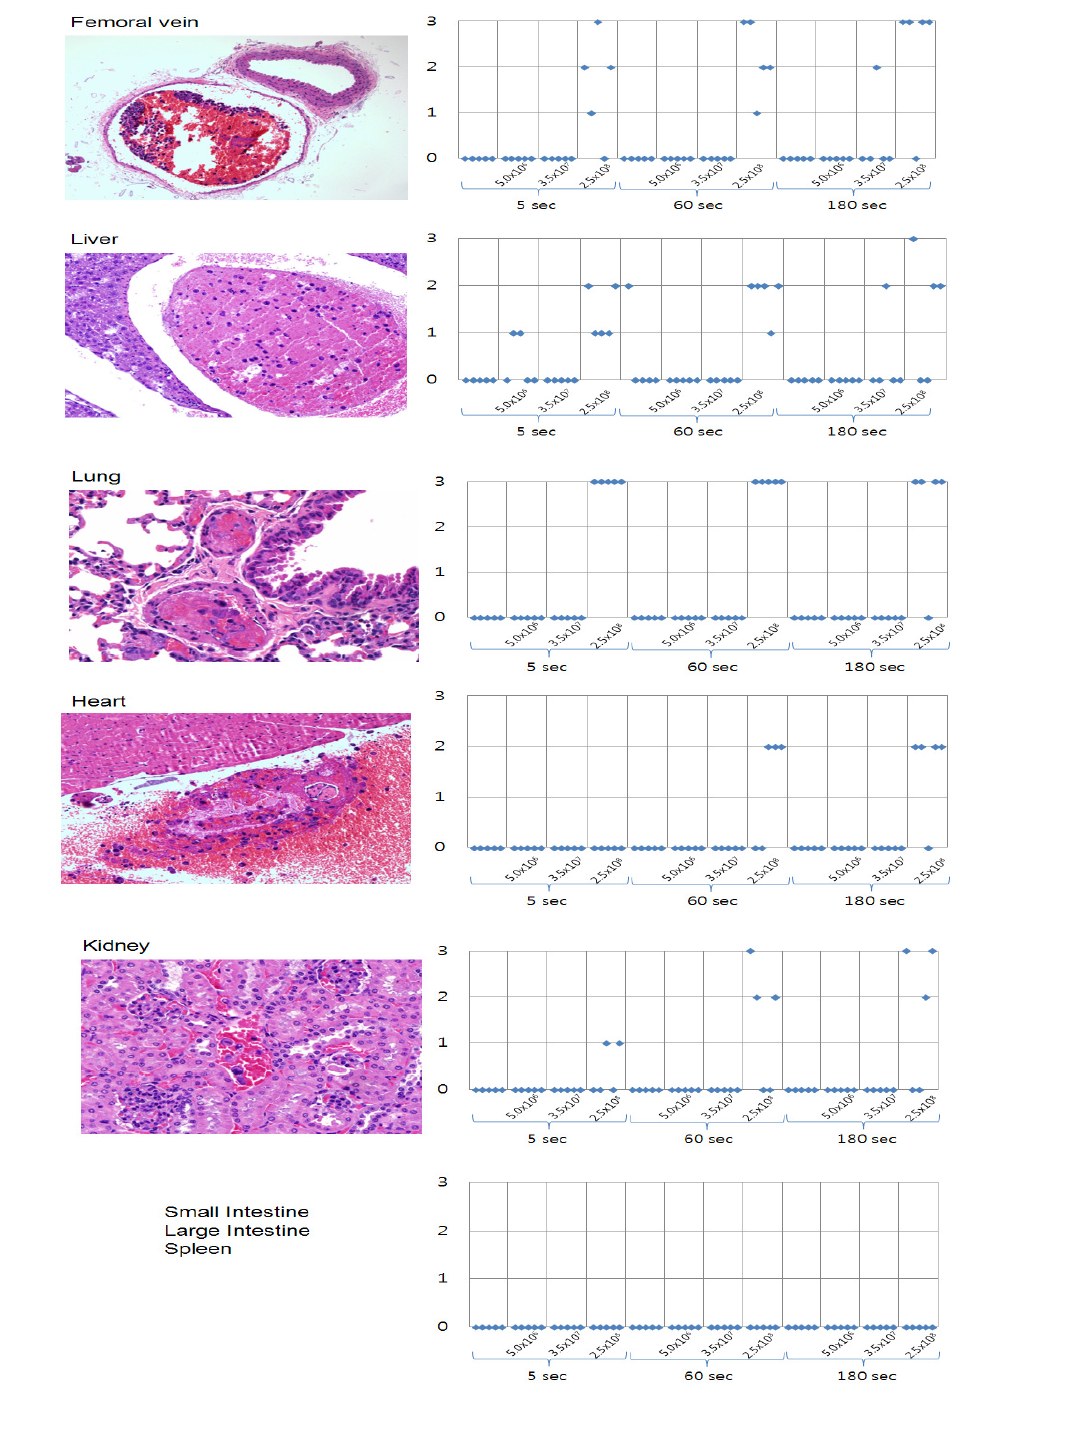 Hematoxylin & Eosin (H&E) staining of each tissue in mouse mesenchymal stem cells injected mice